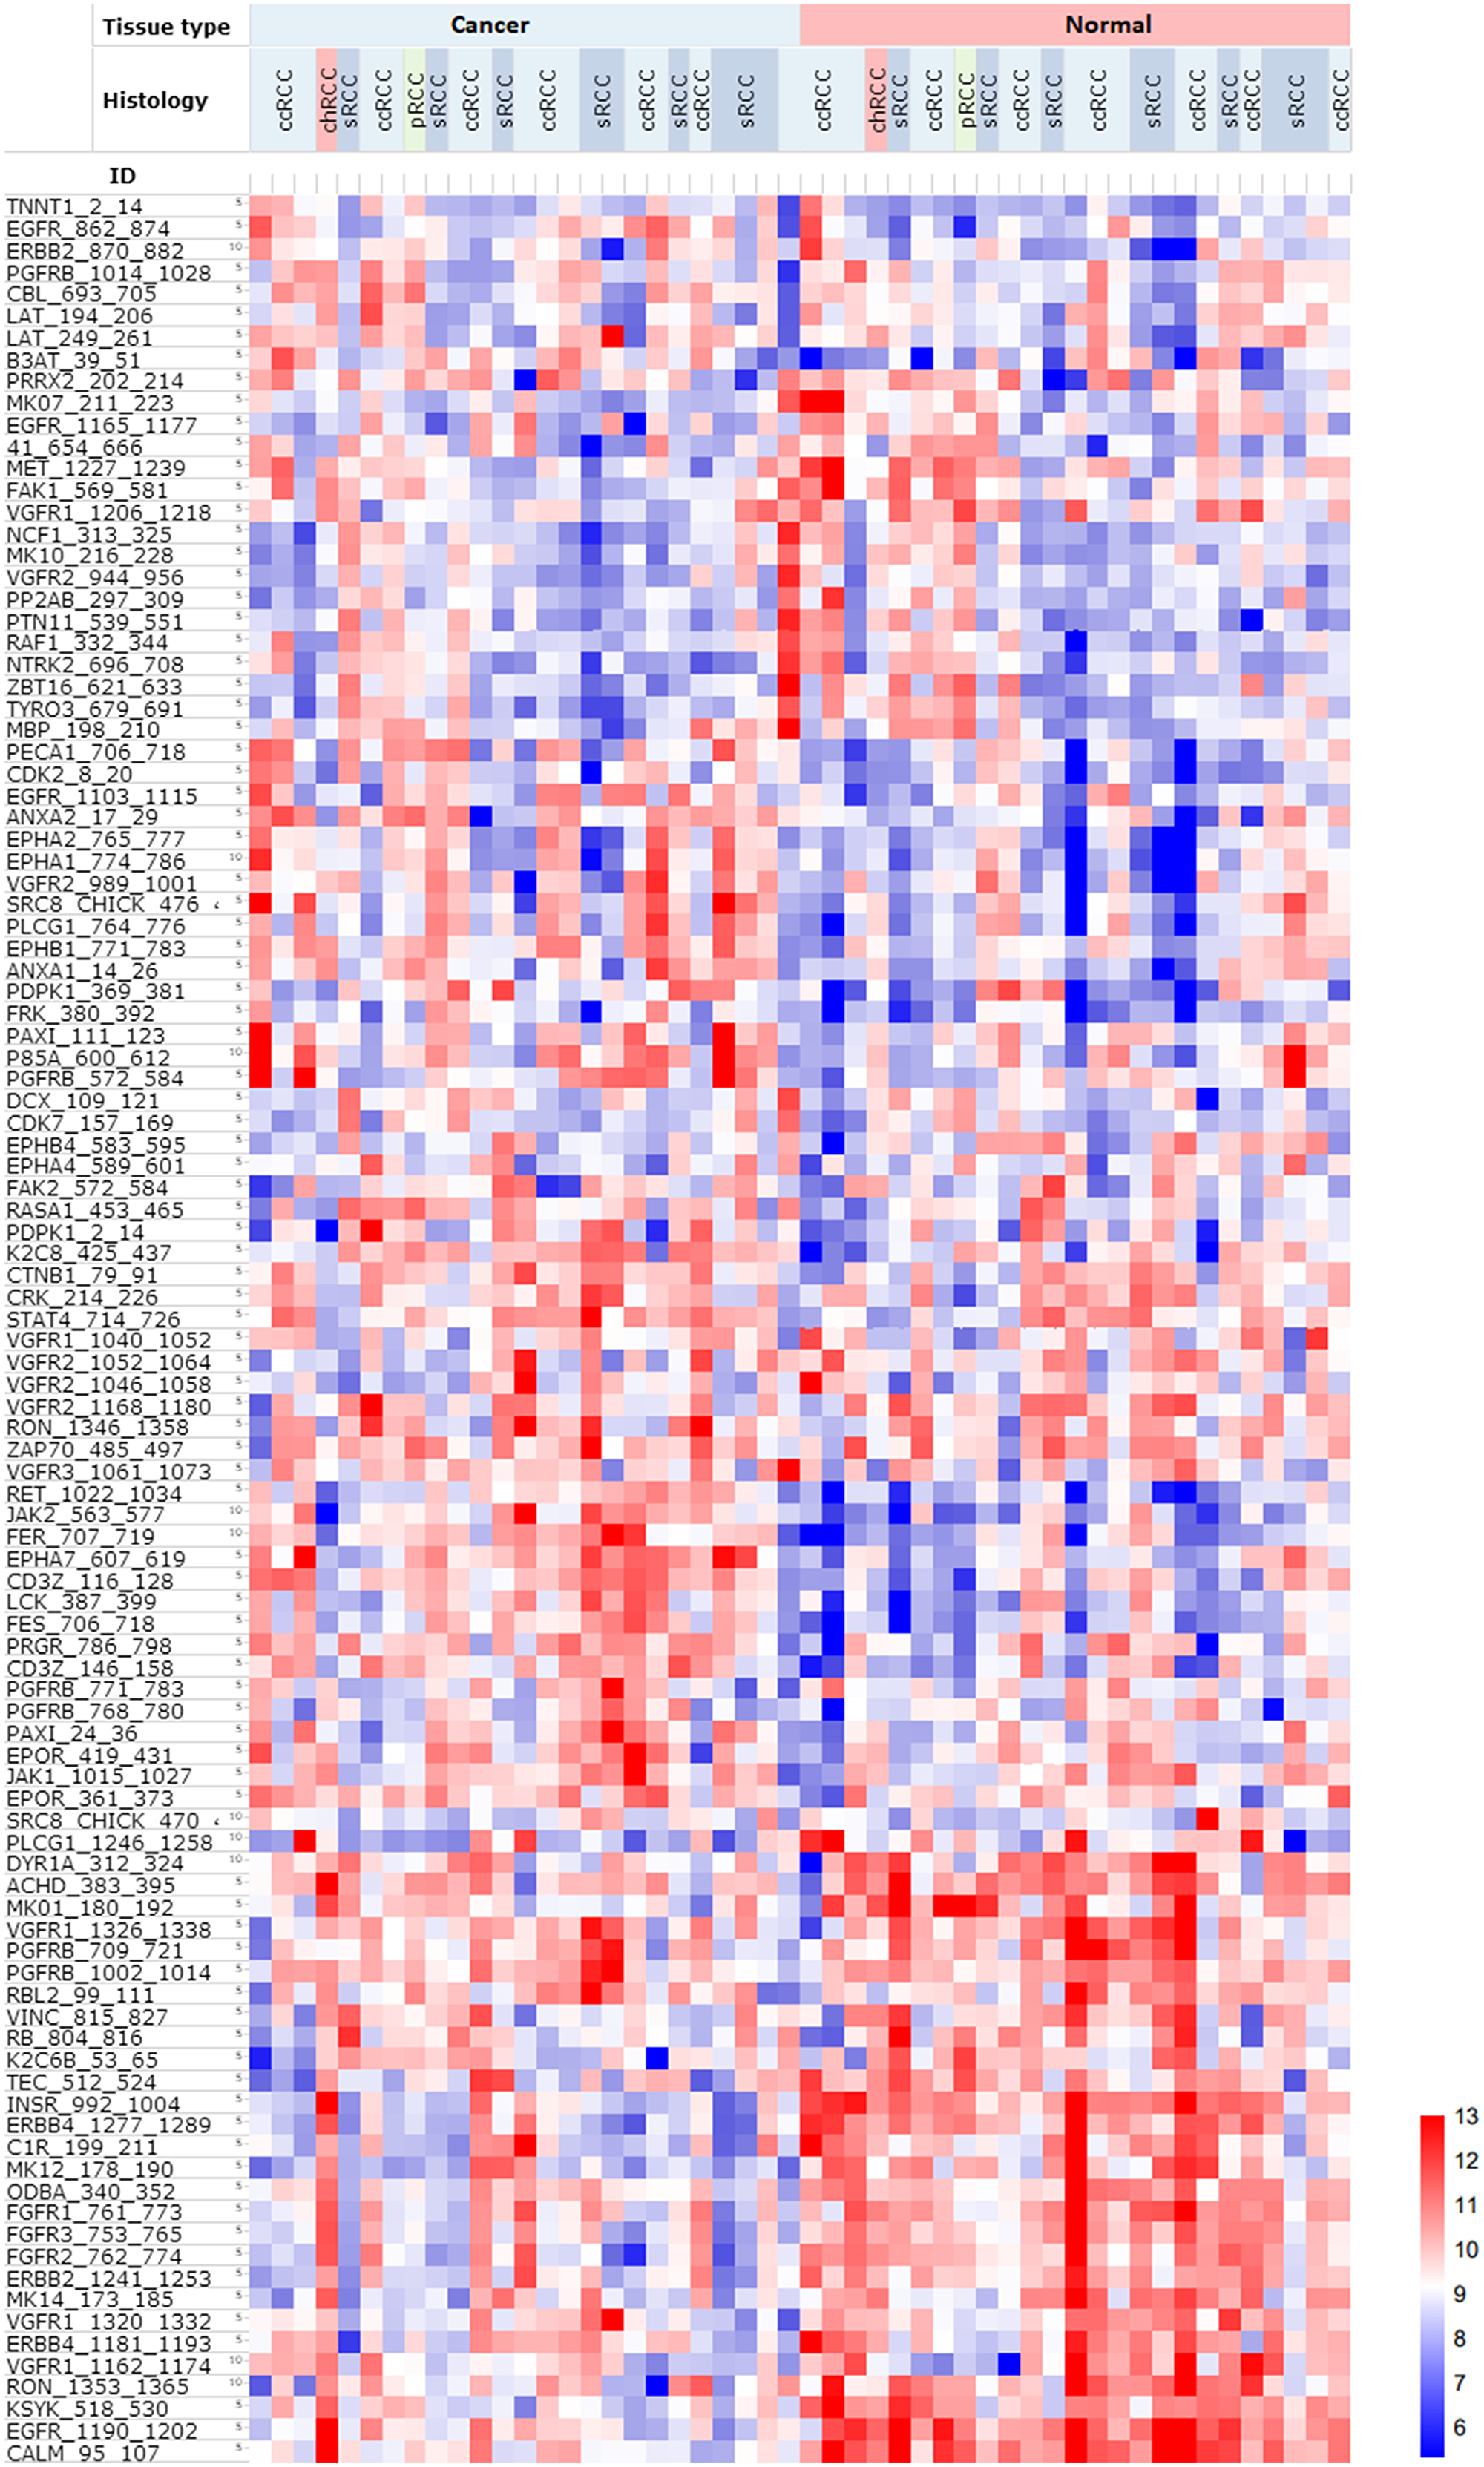 Heatmap of PTK phosphorylation profiles of 25 RCC patients, including malignant and matched normal tissue from the same patient (n = 50).